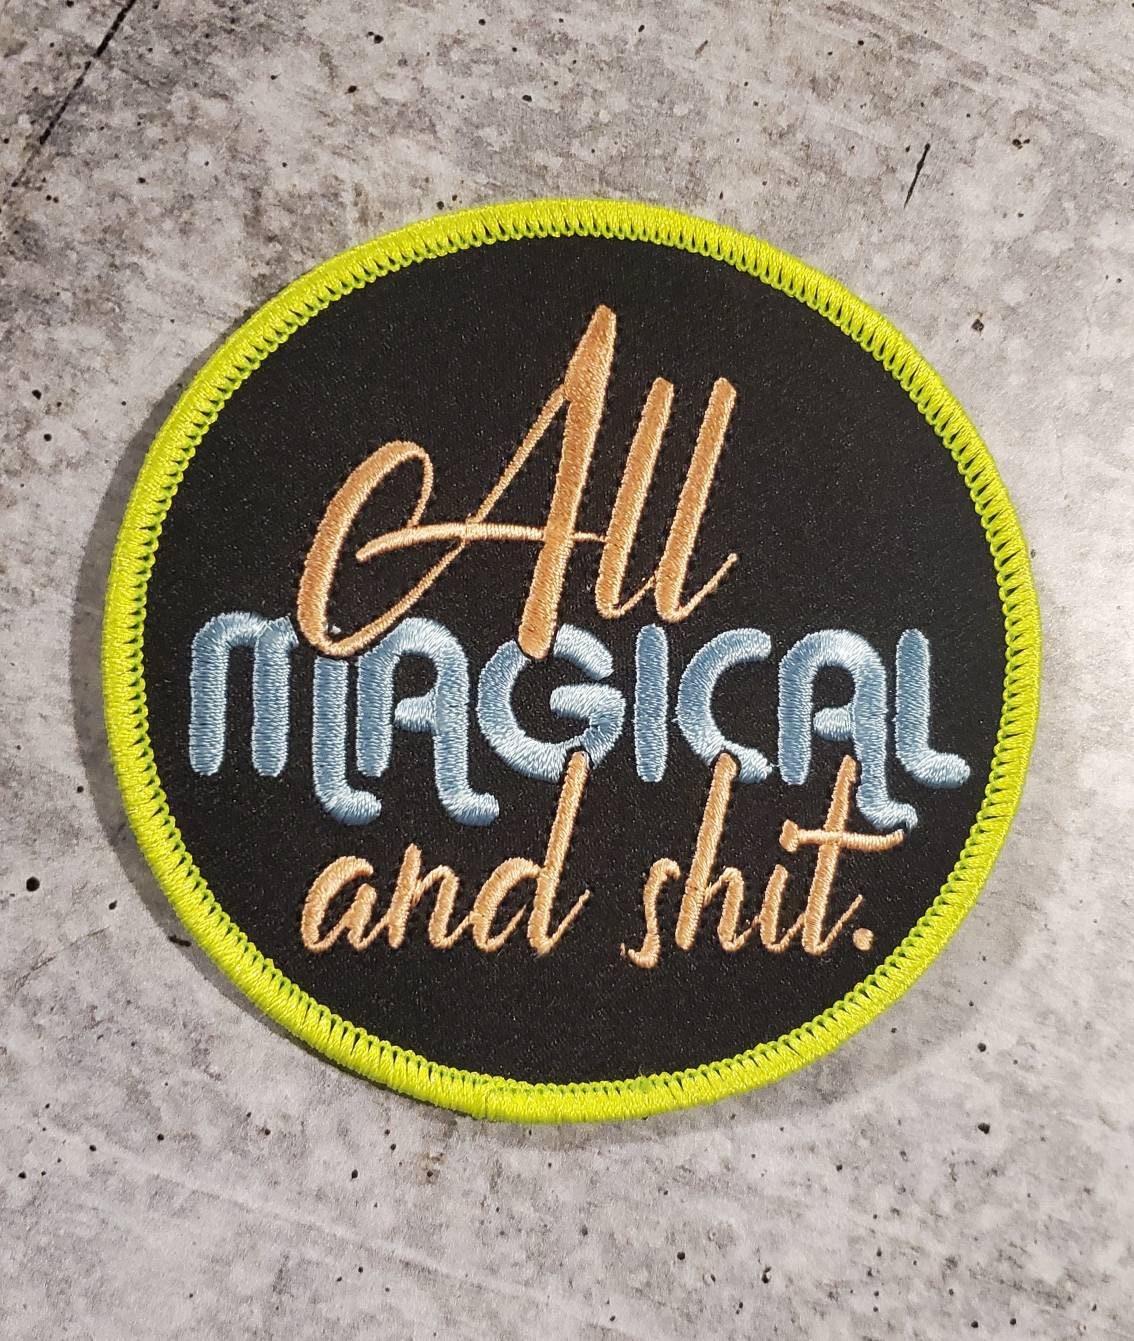 New Arrival,"All Magical & Sh*t" Circular Badge, Iron on Embroidered Patch, Positive Applique, Cool Patch for Clothing, Size 3"